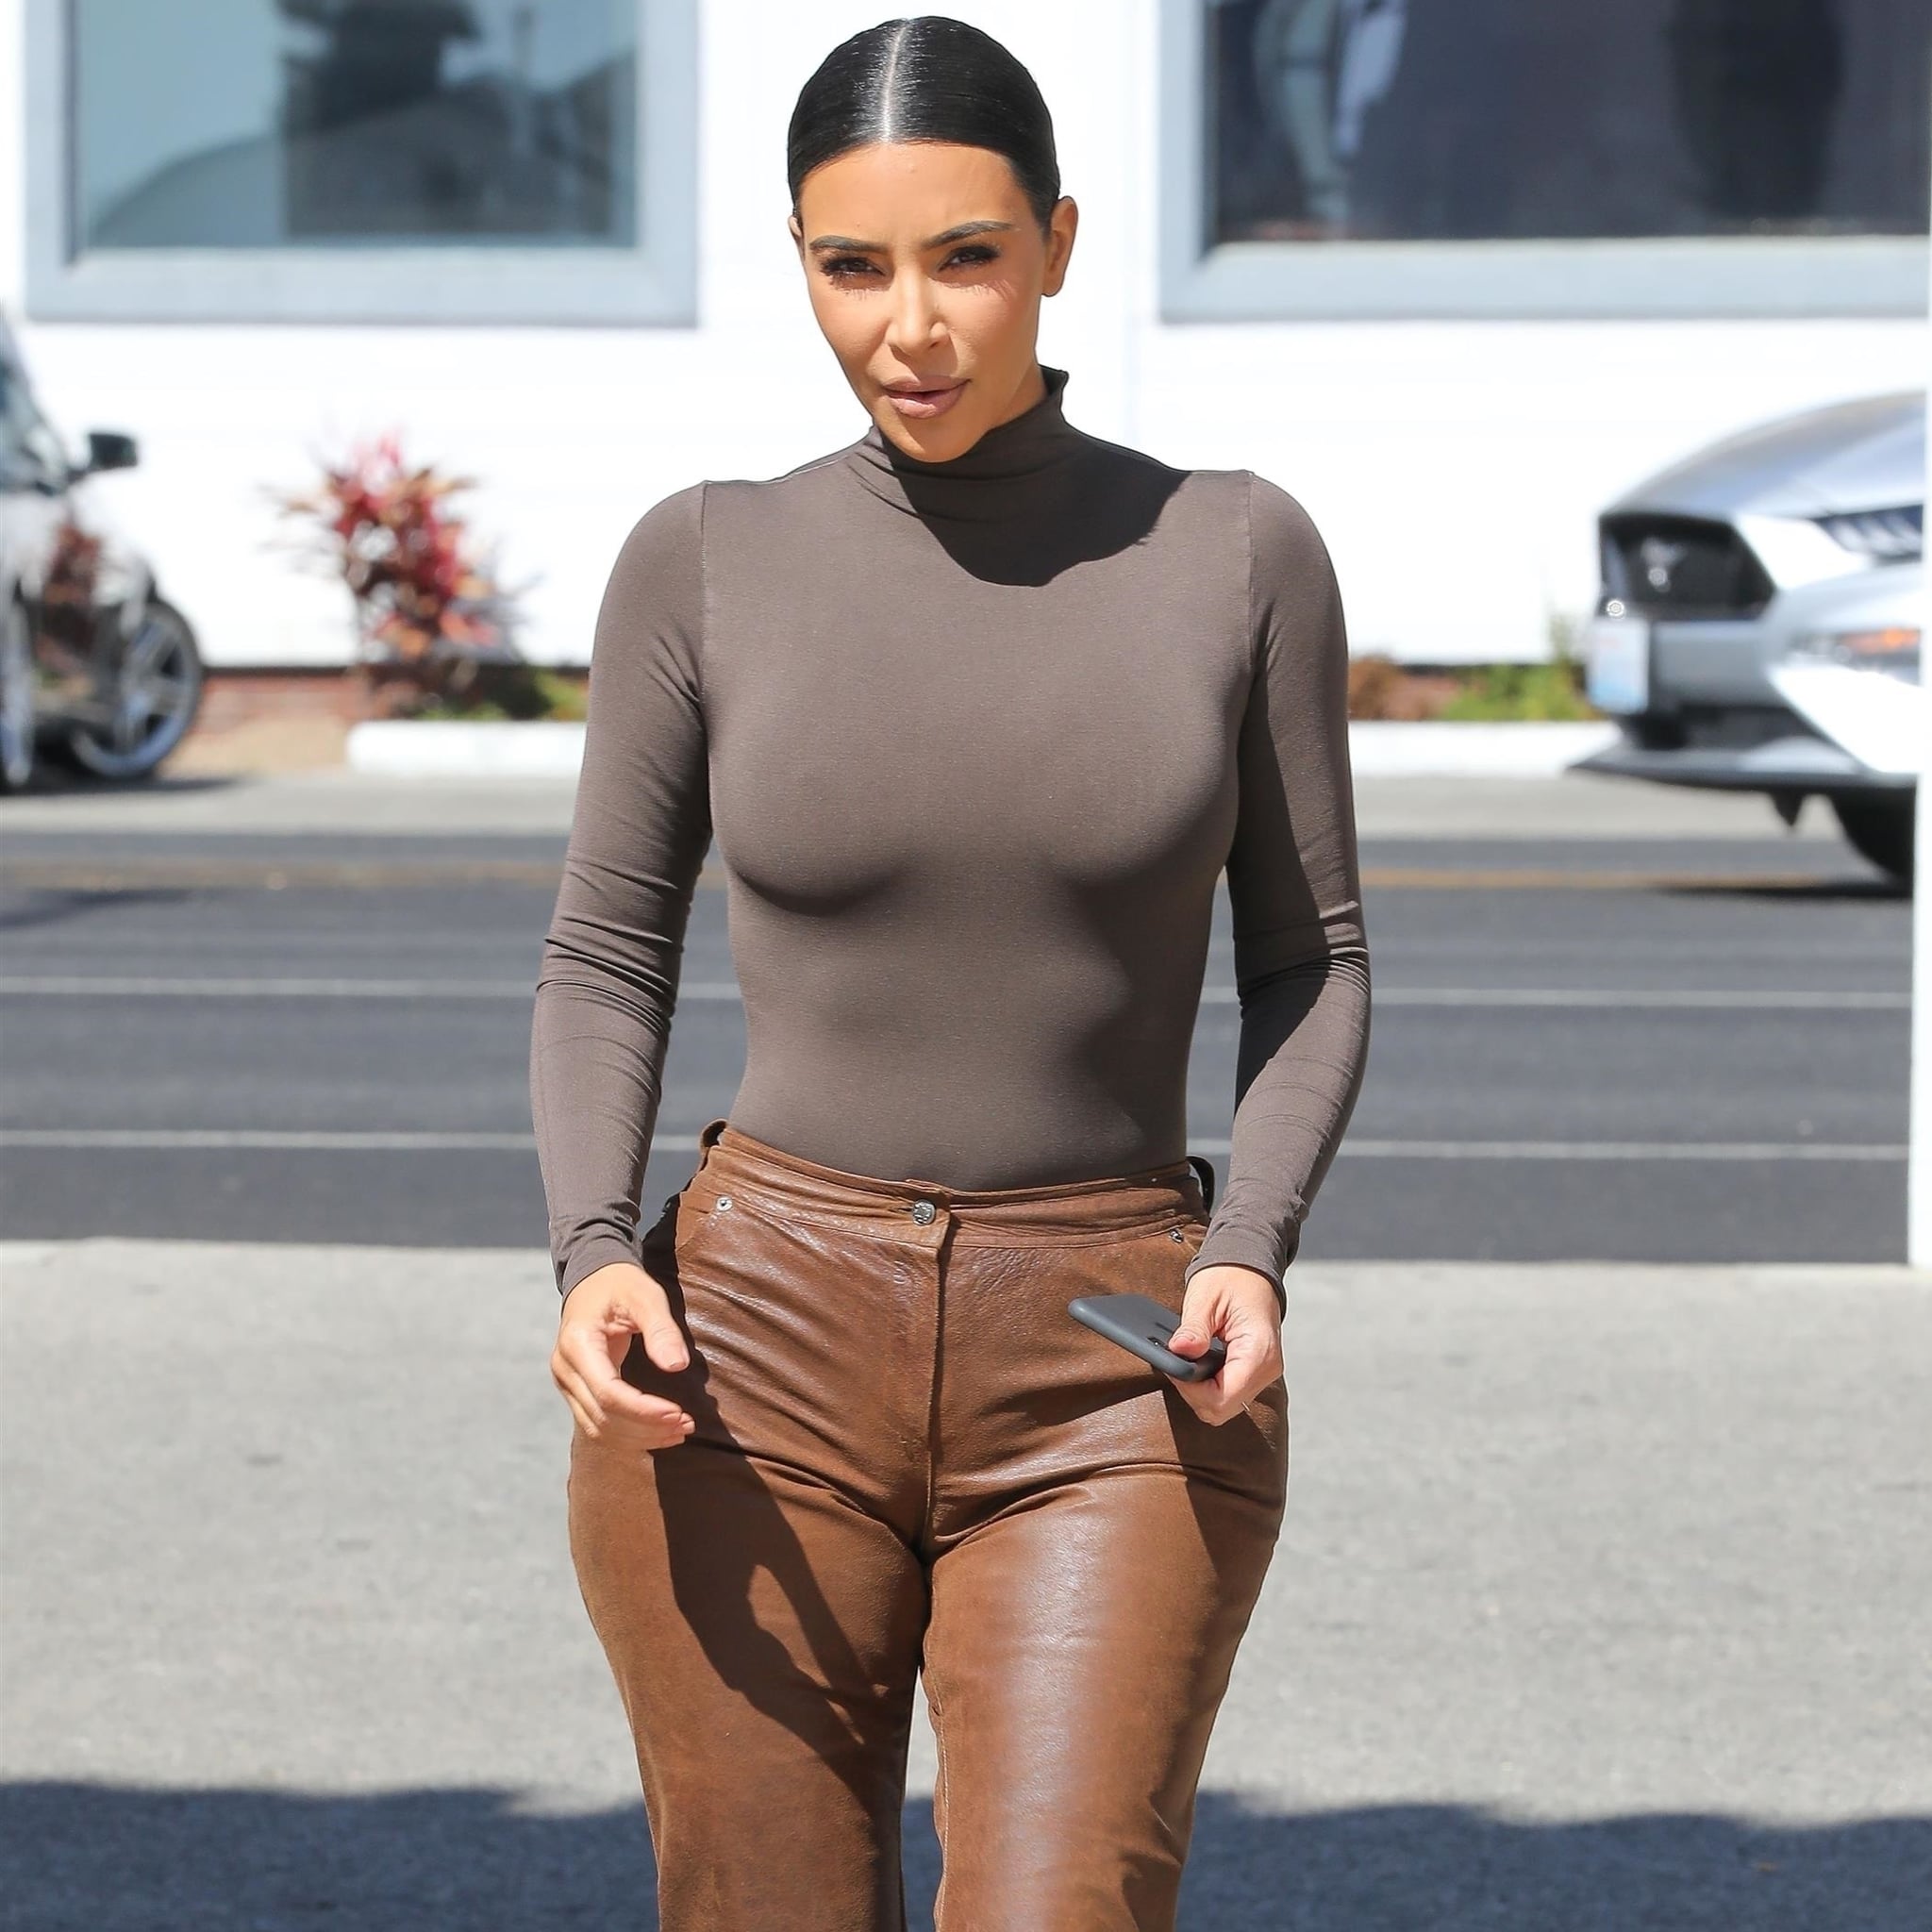 Stars In Leather Pants: See Photos Of Celebs in The Trend